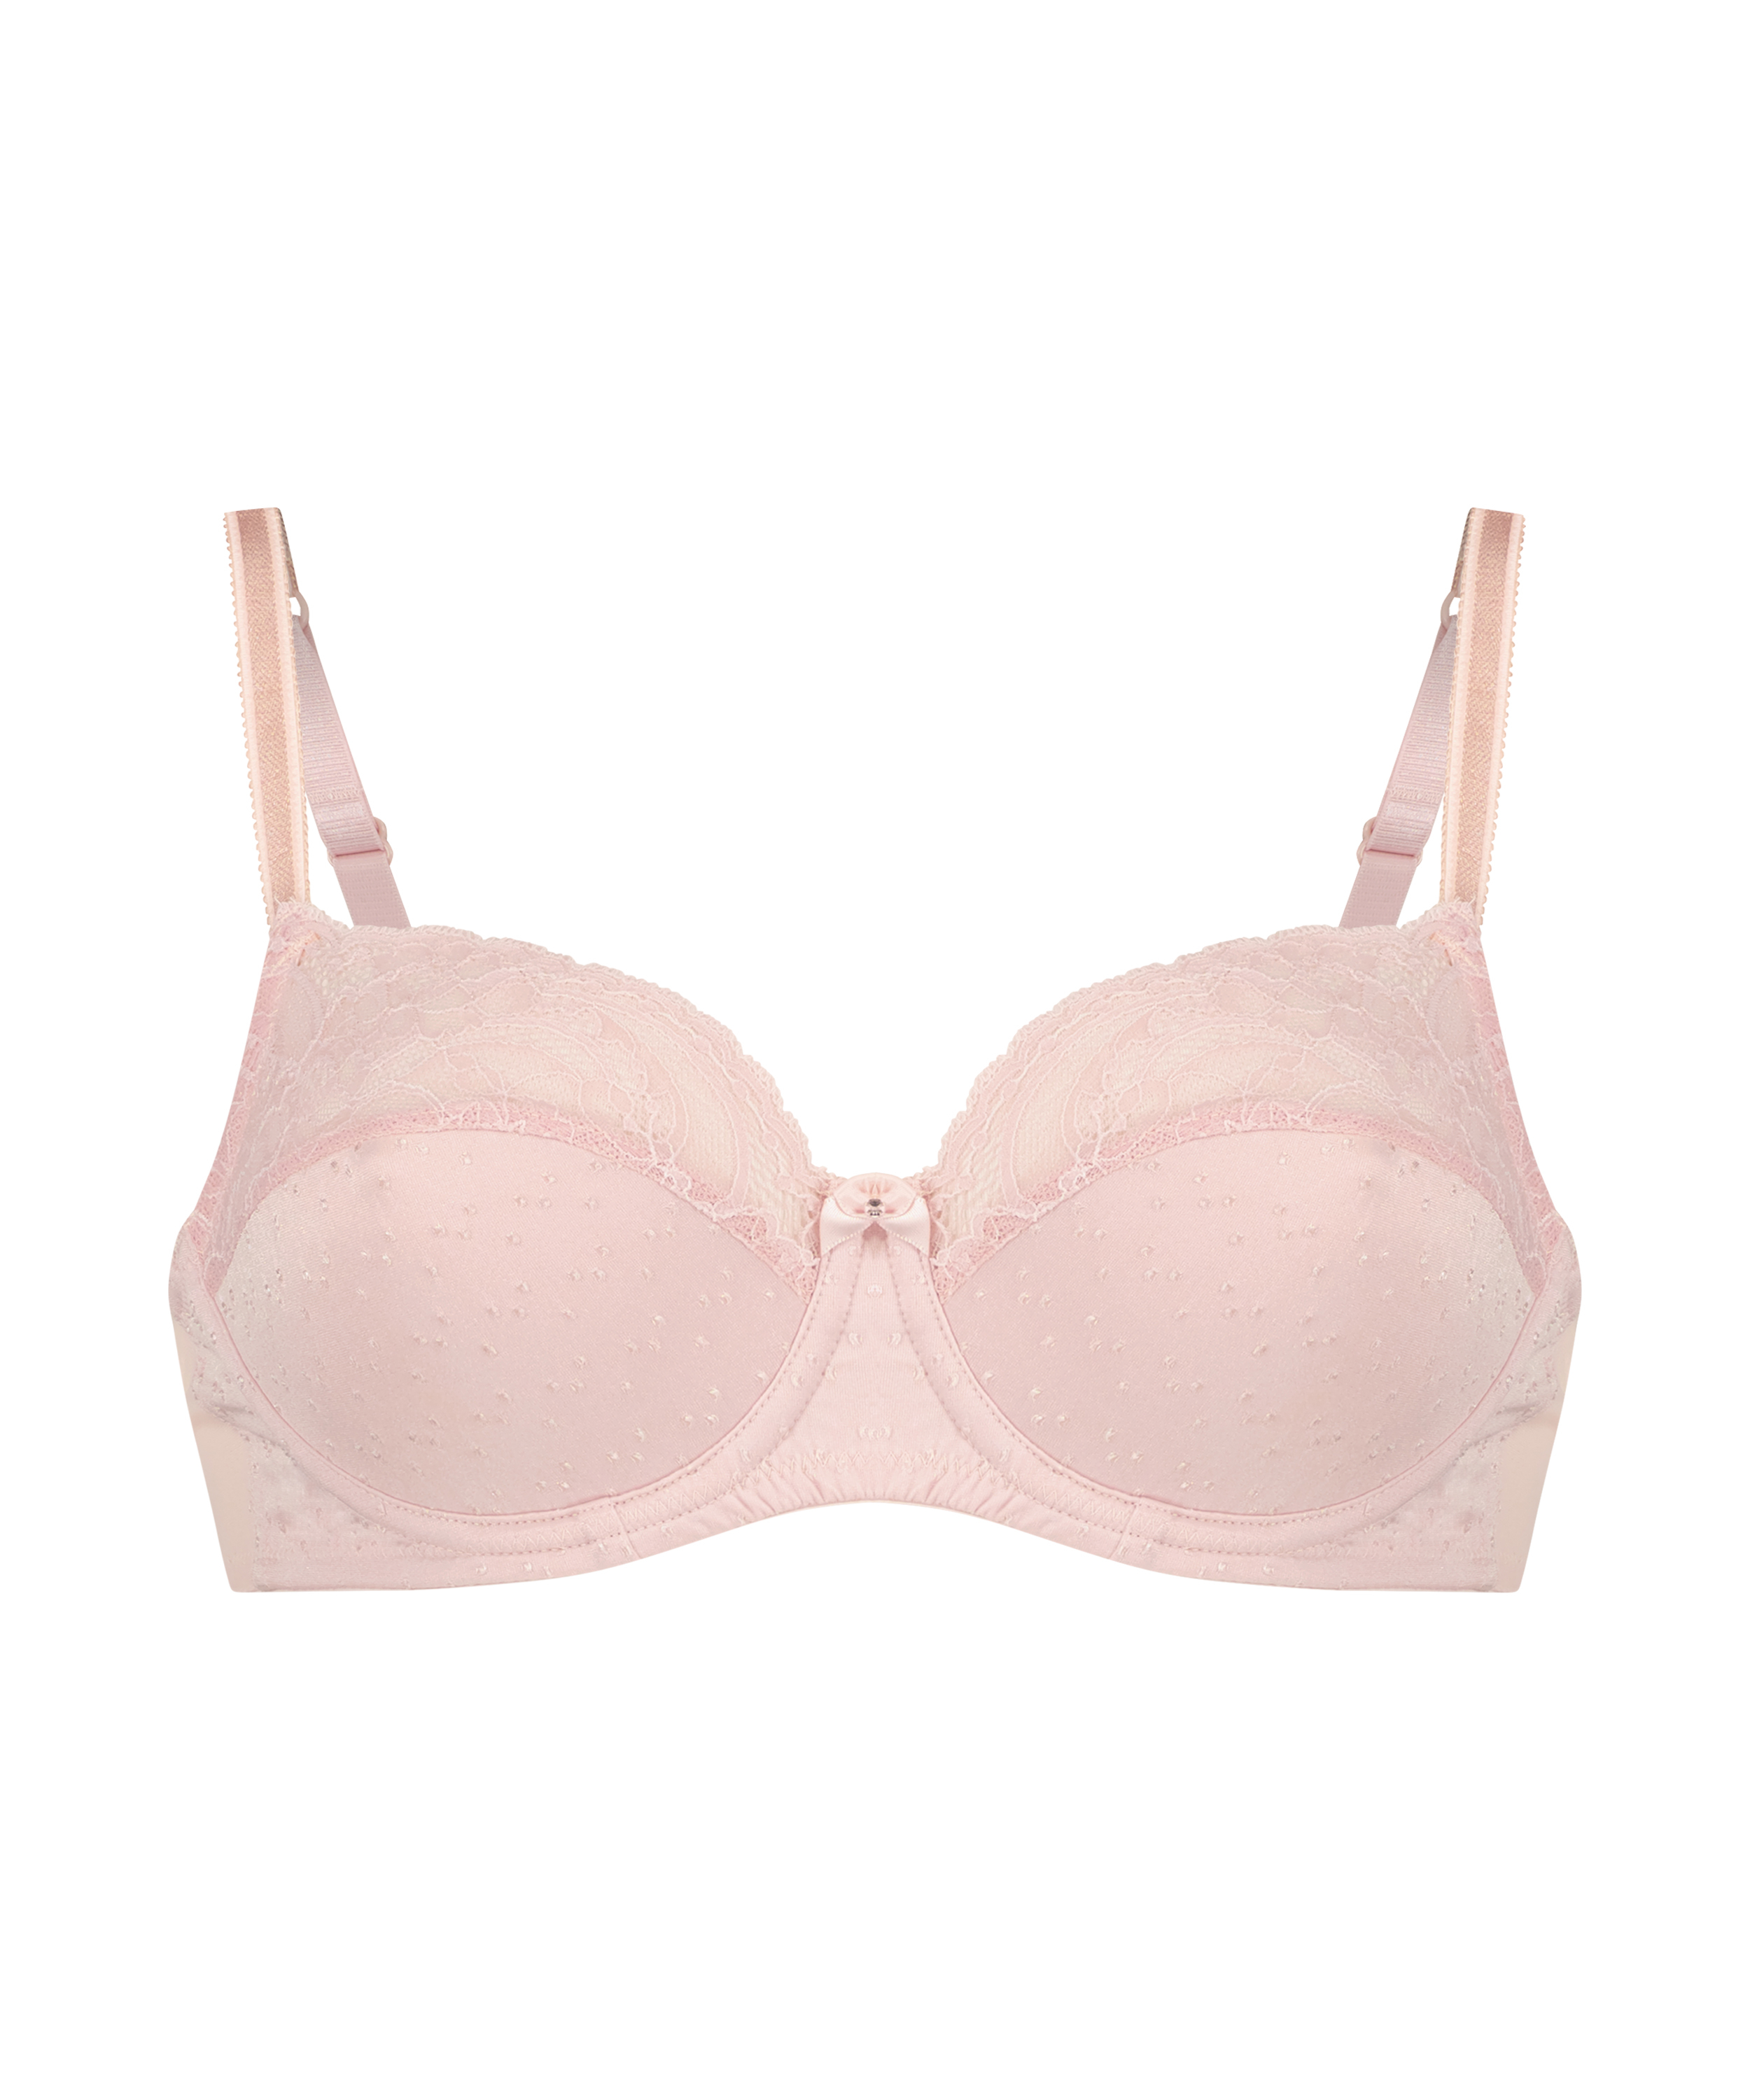 Sophie Non-Padded Underwired Bra, Pink, main